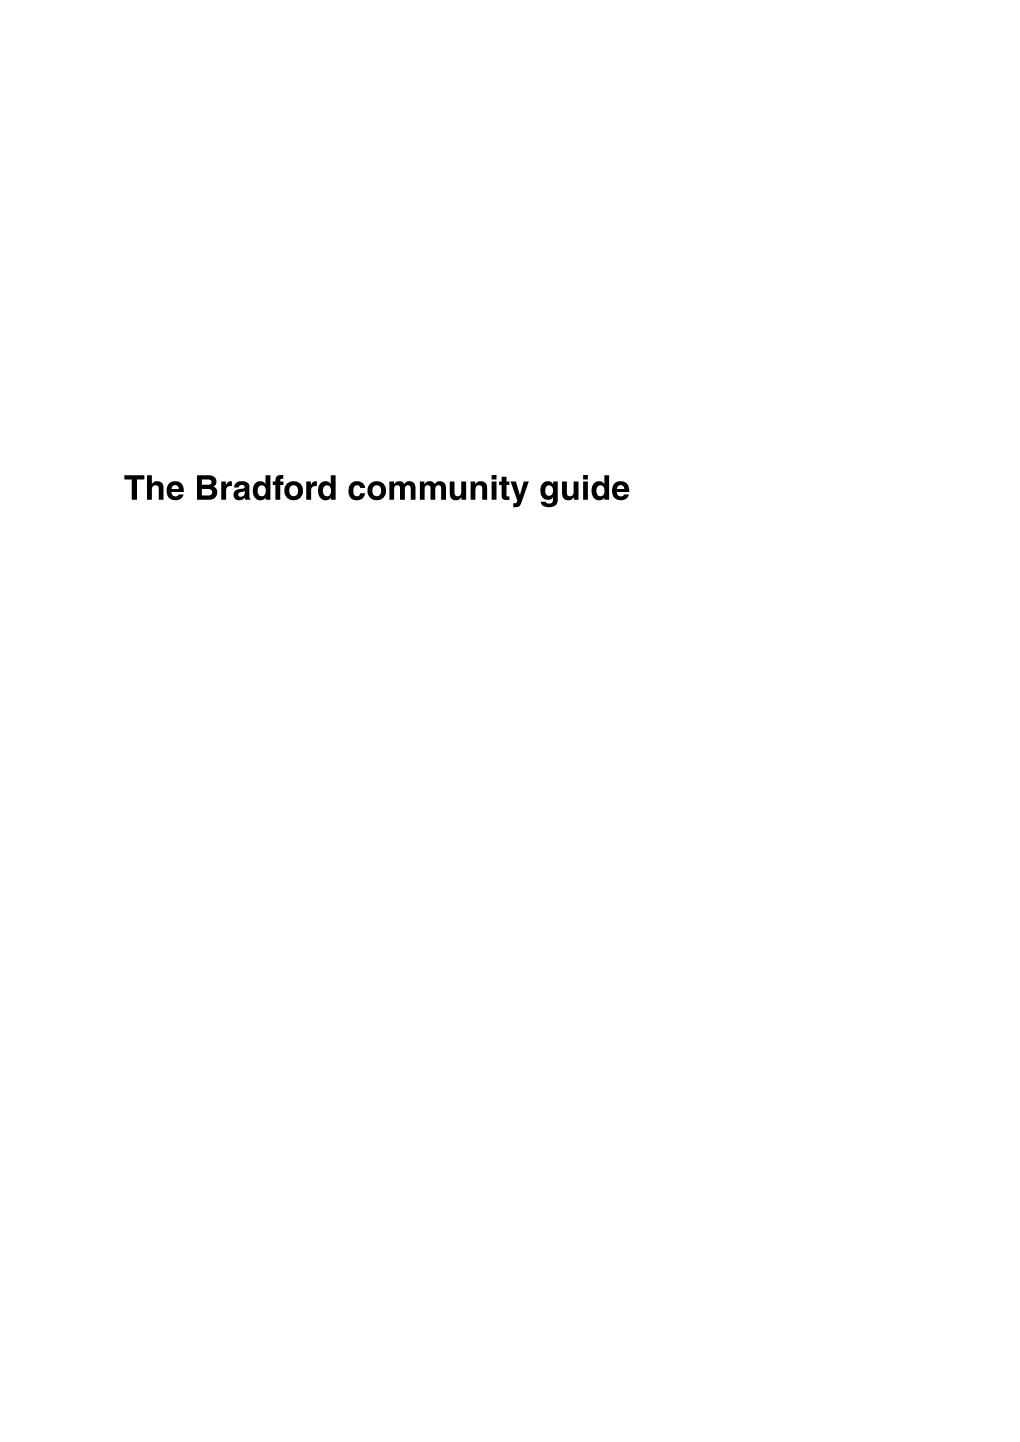 The Bradford Community Guide This Publication Can Be Provided in Other Formats, Such As Large Print, Braille and Audio